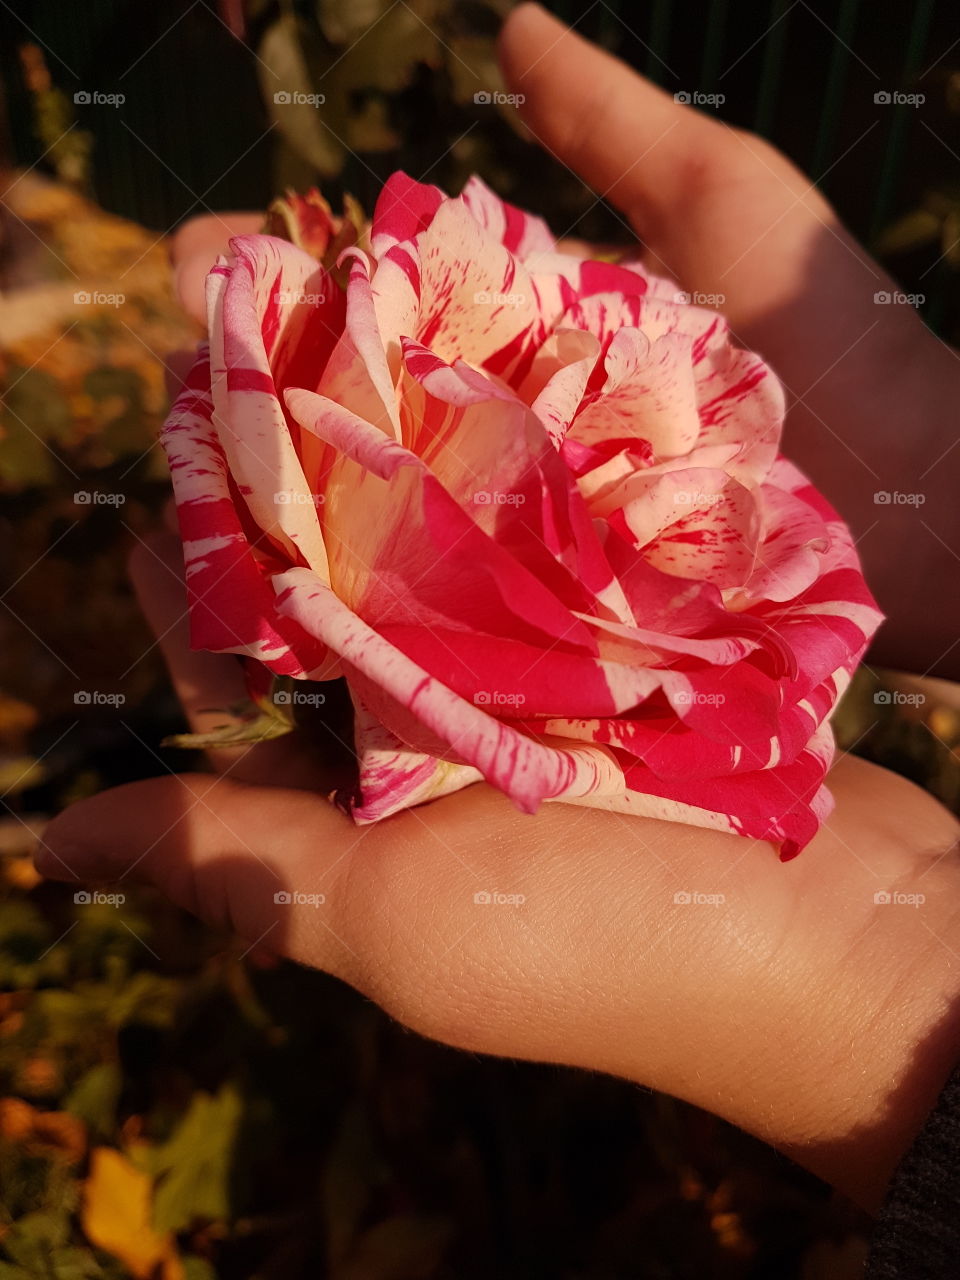 beautiful red and white color rose in girl hands